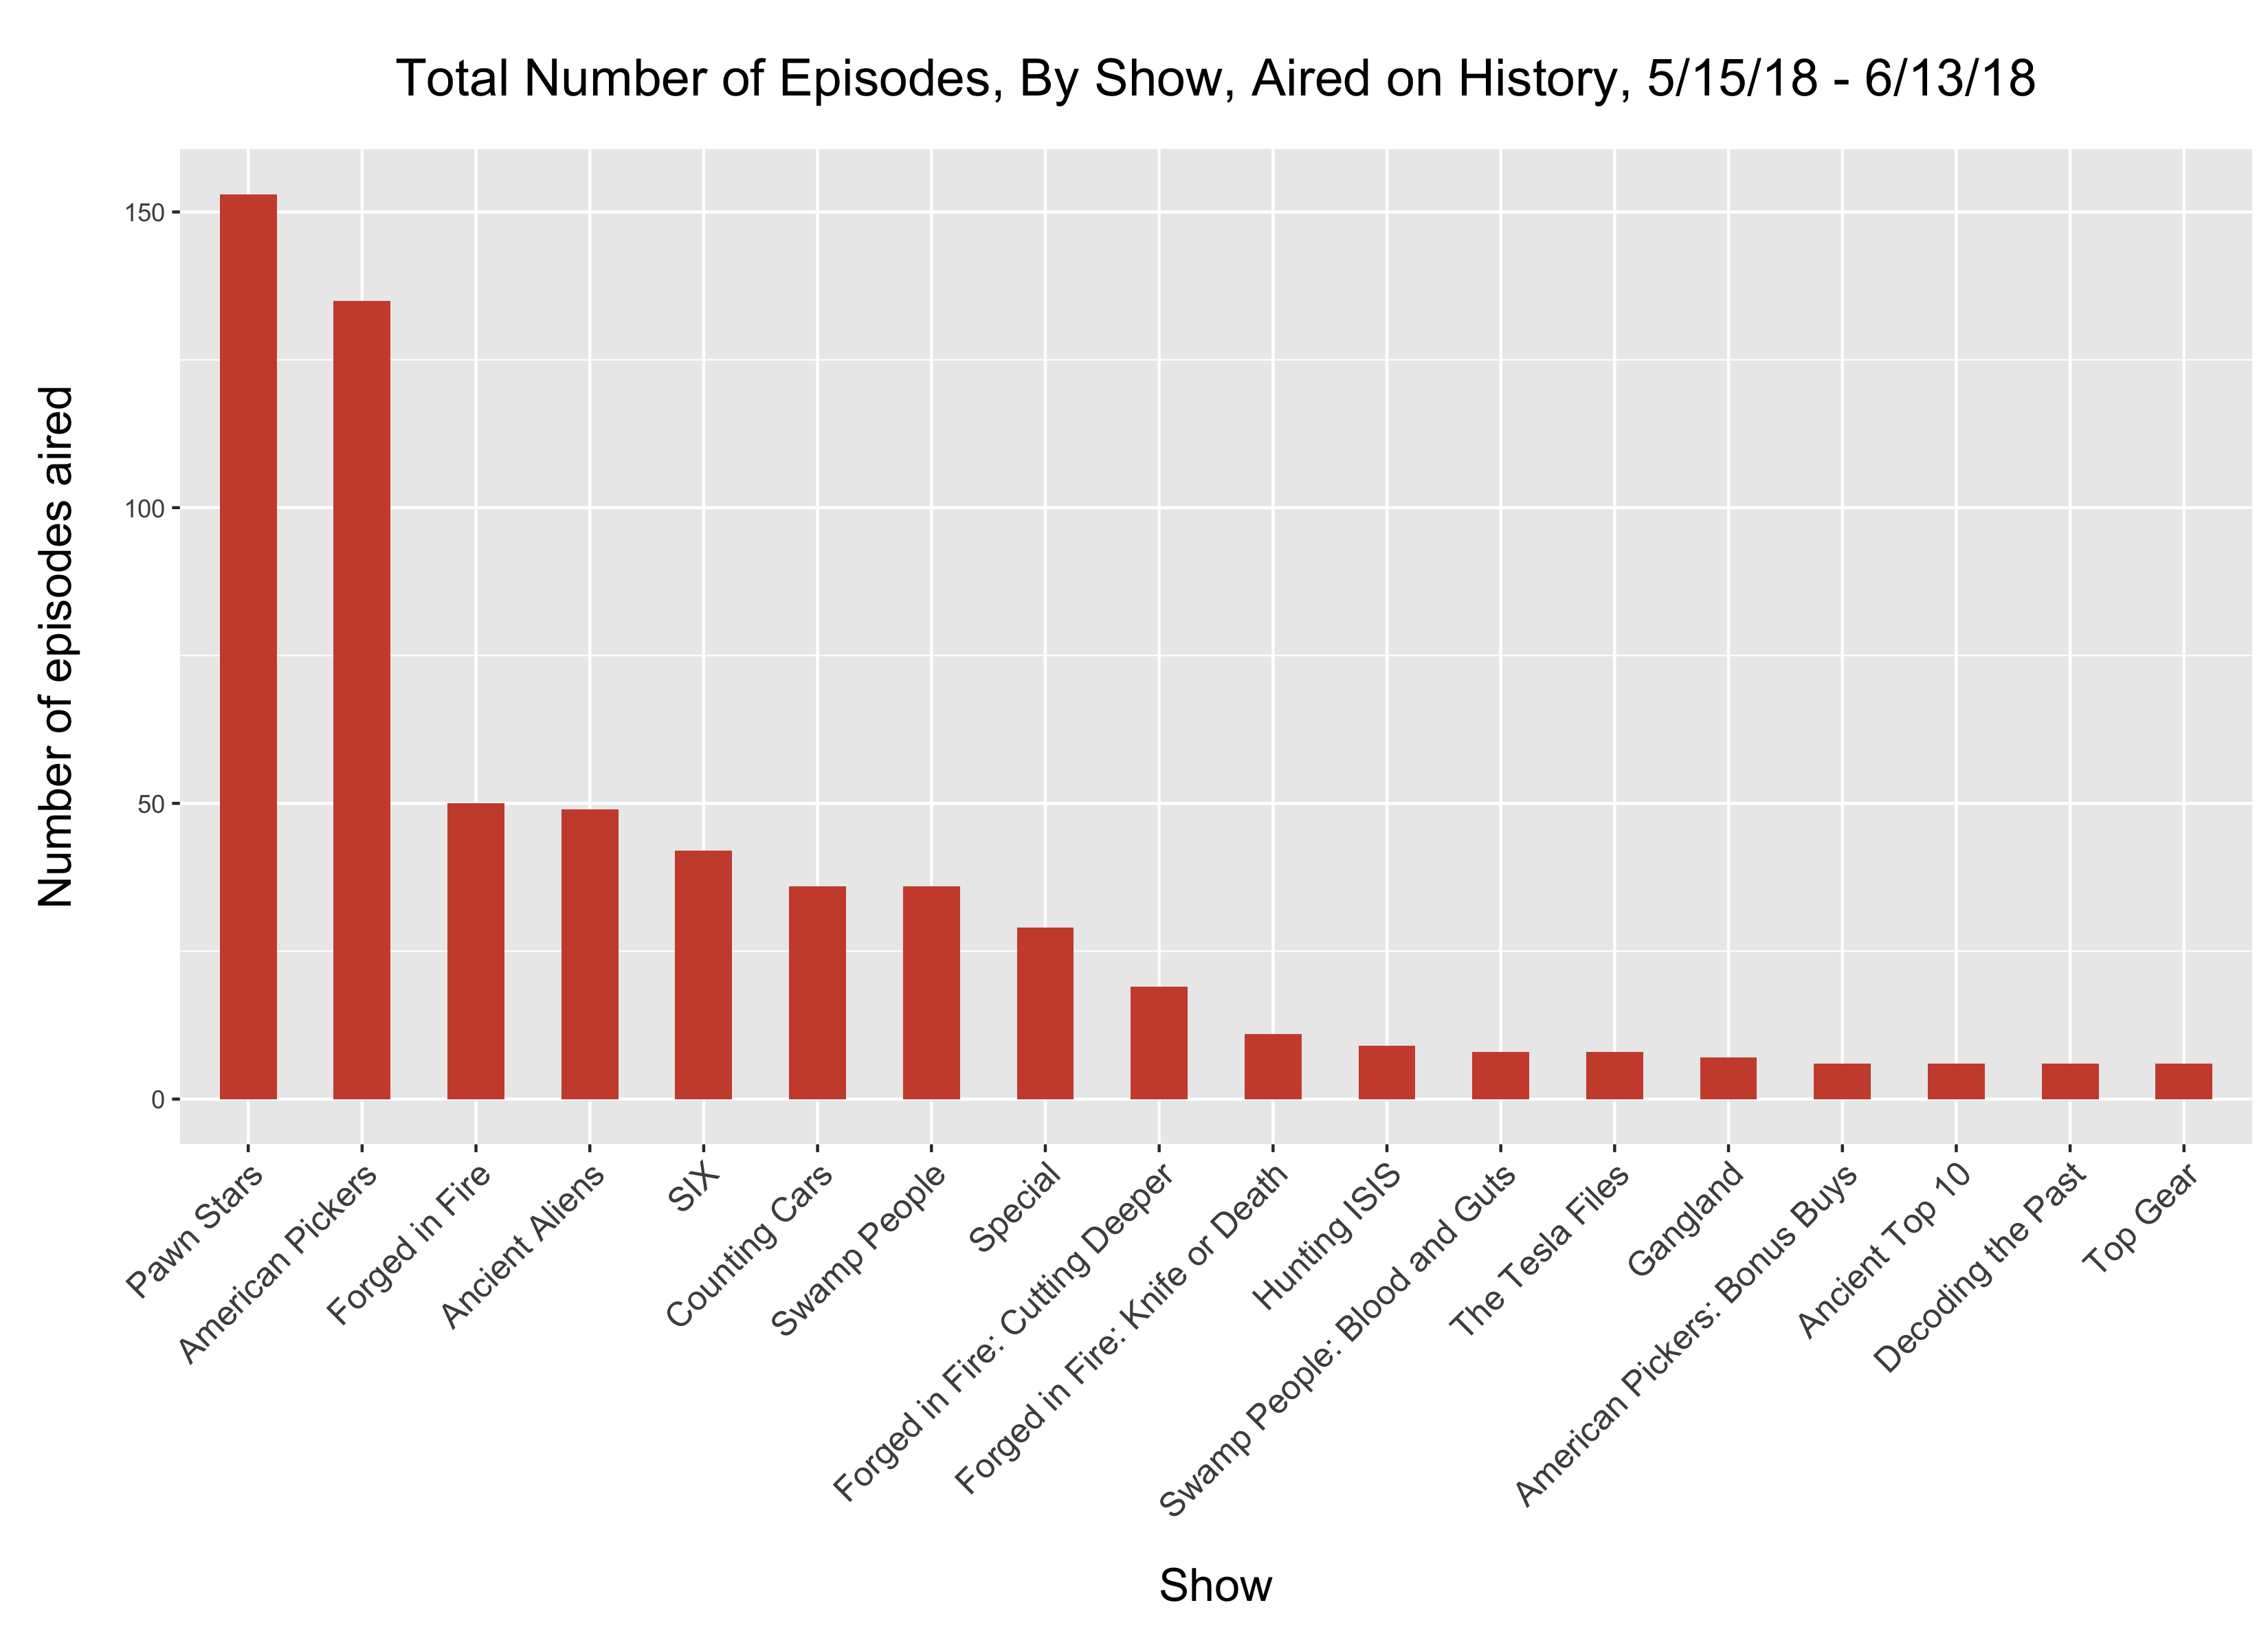 A visualization of the most frequently aired shows on History.The most frequently aired
shows were Pawn Stars, American Pickers, Forged in Fire, Ancient Aliens, SIX,
and Counting Cars.